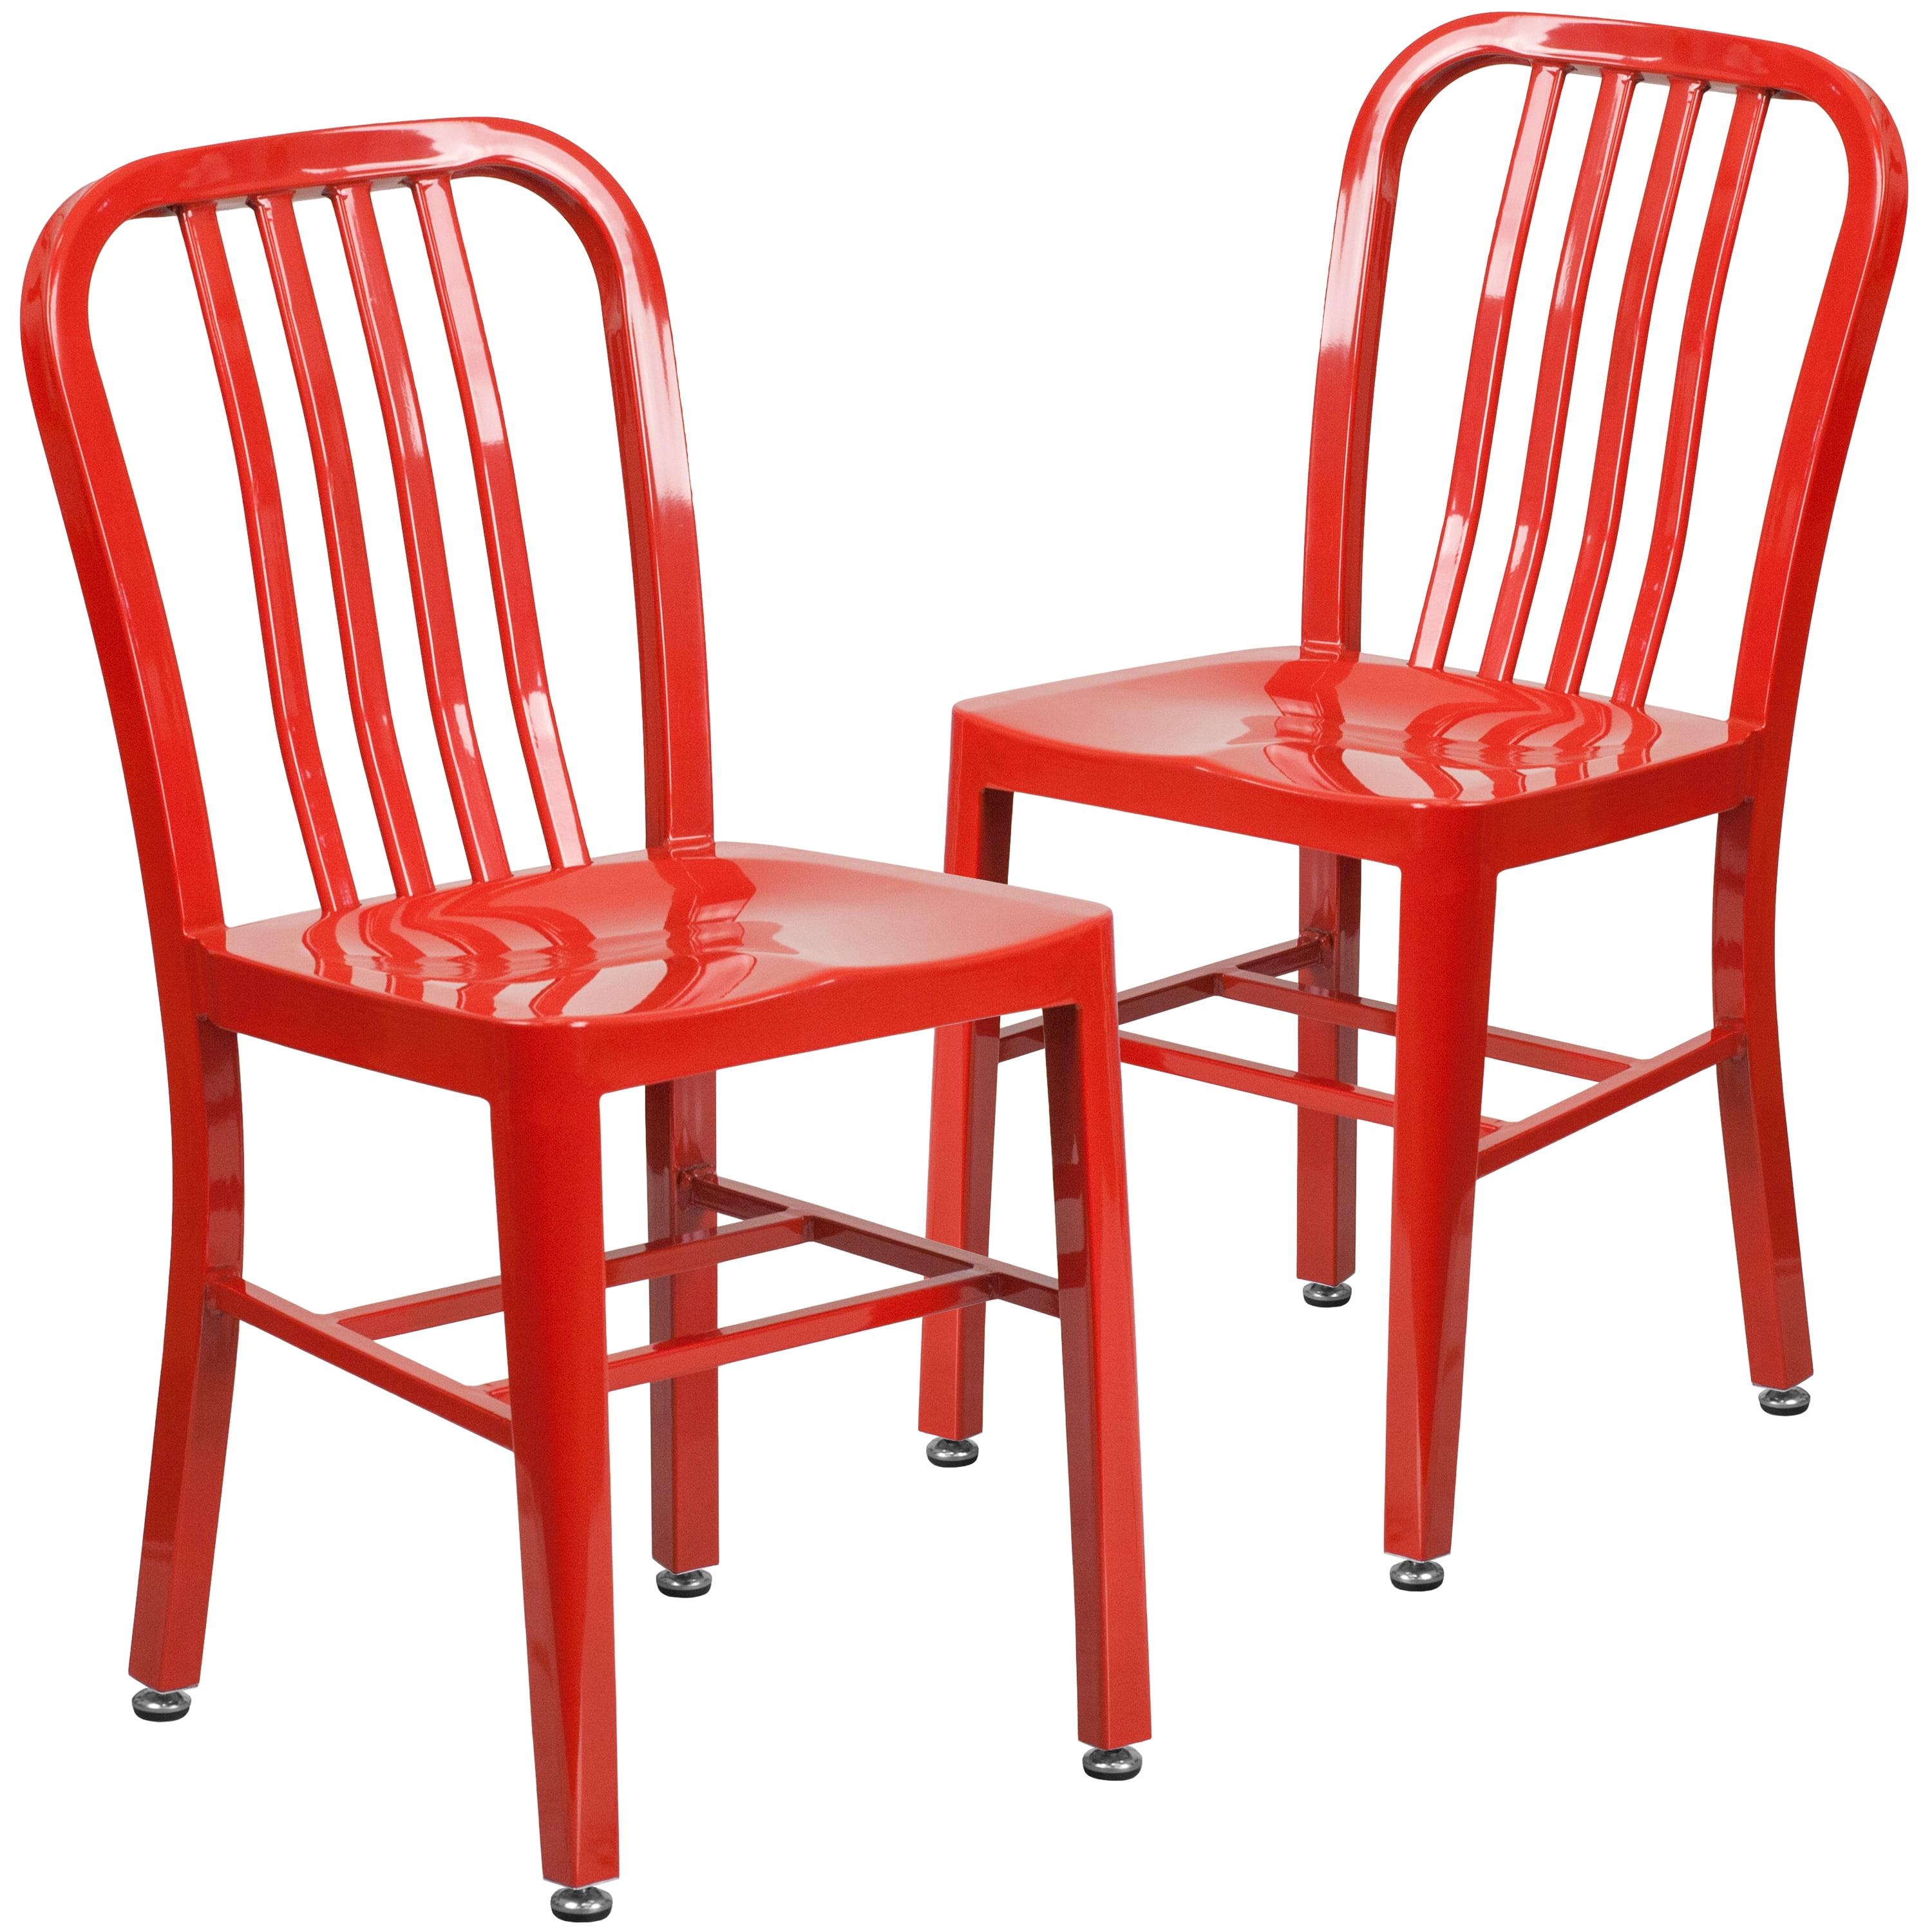 Glossy Red Metal Indoor-Outdoor Dining Chair Duo